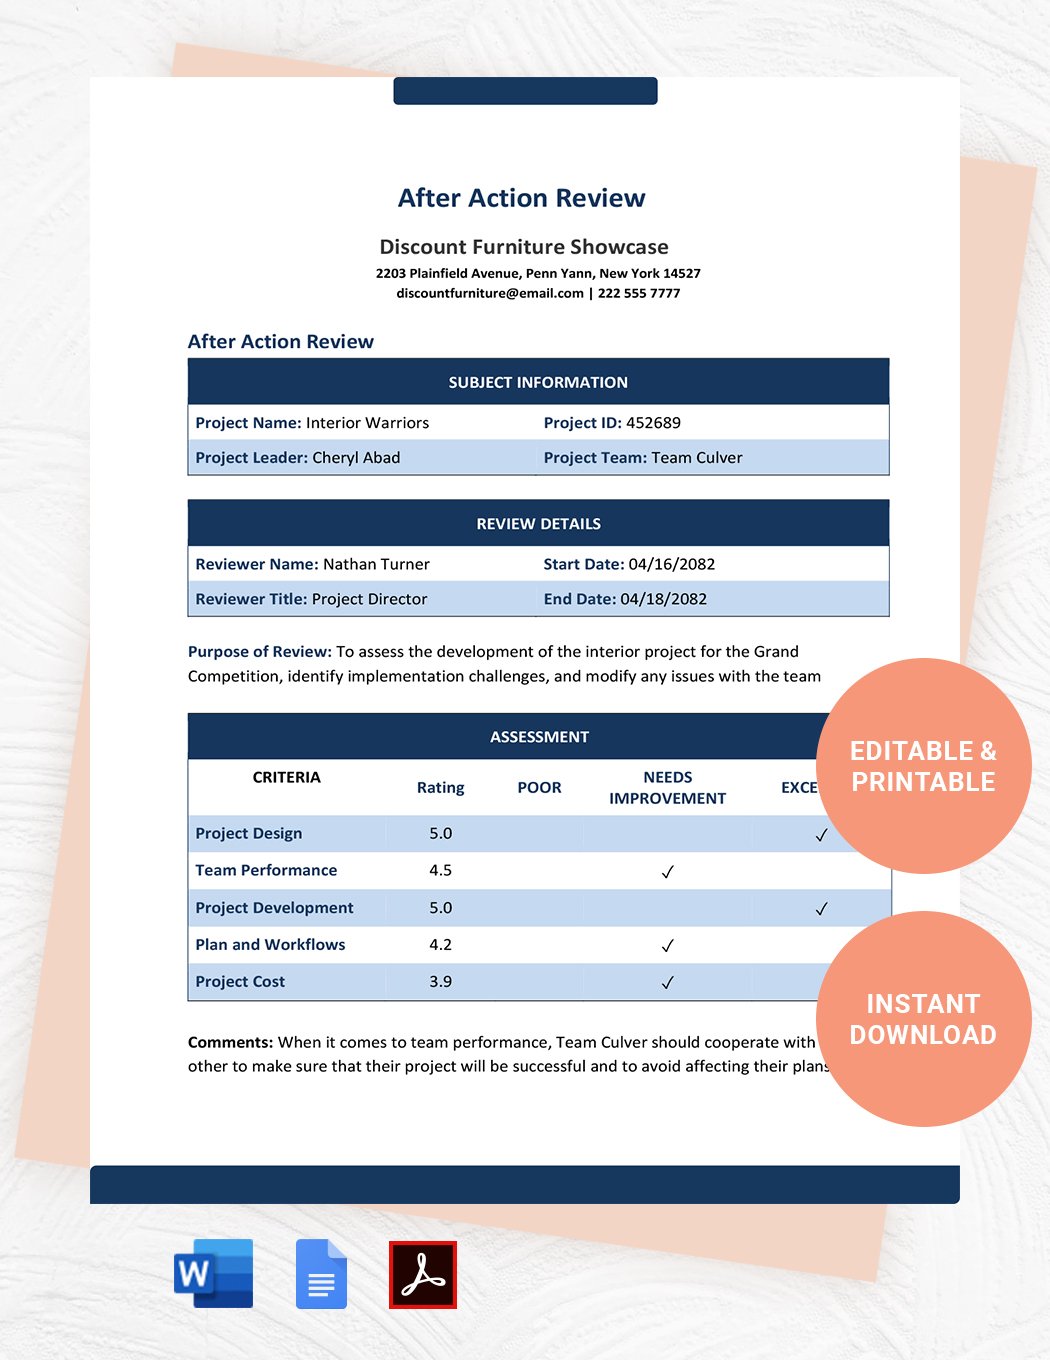 After Action Review Template